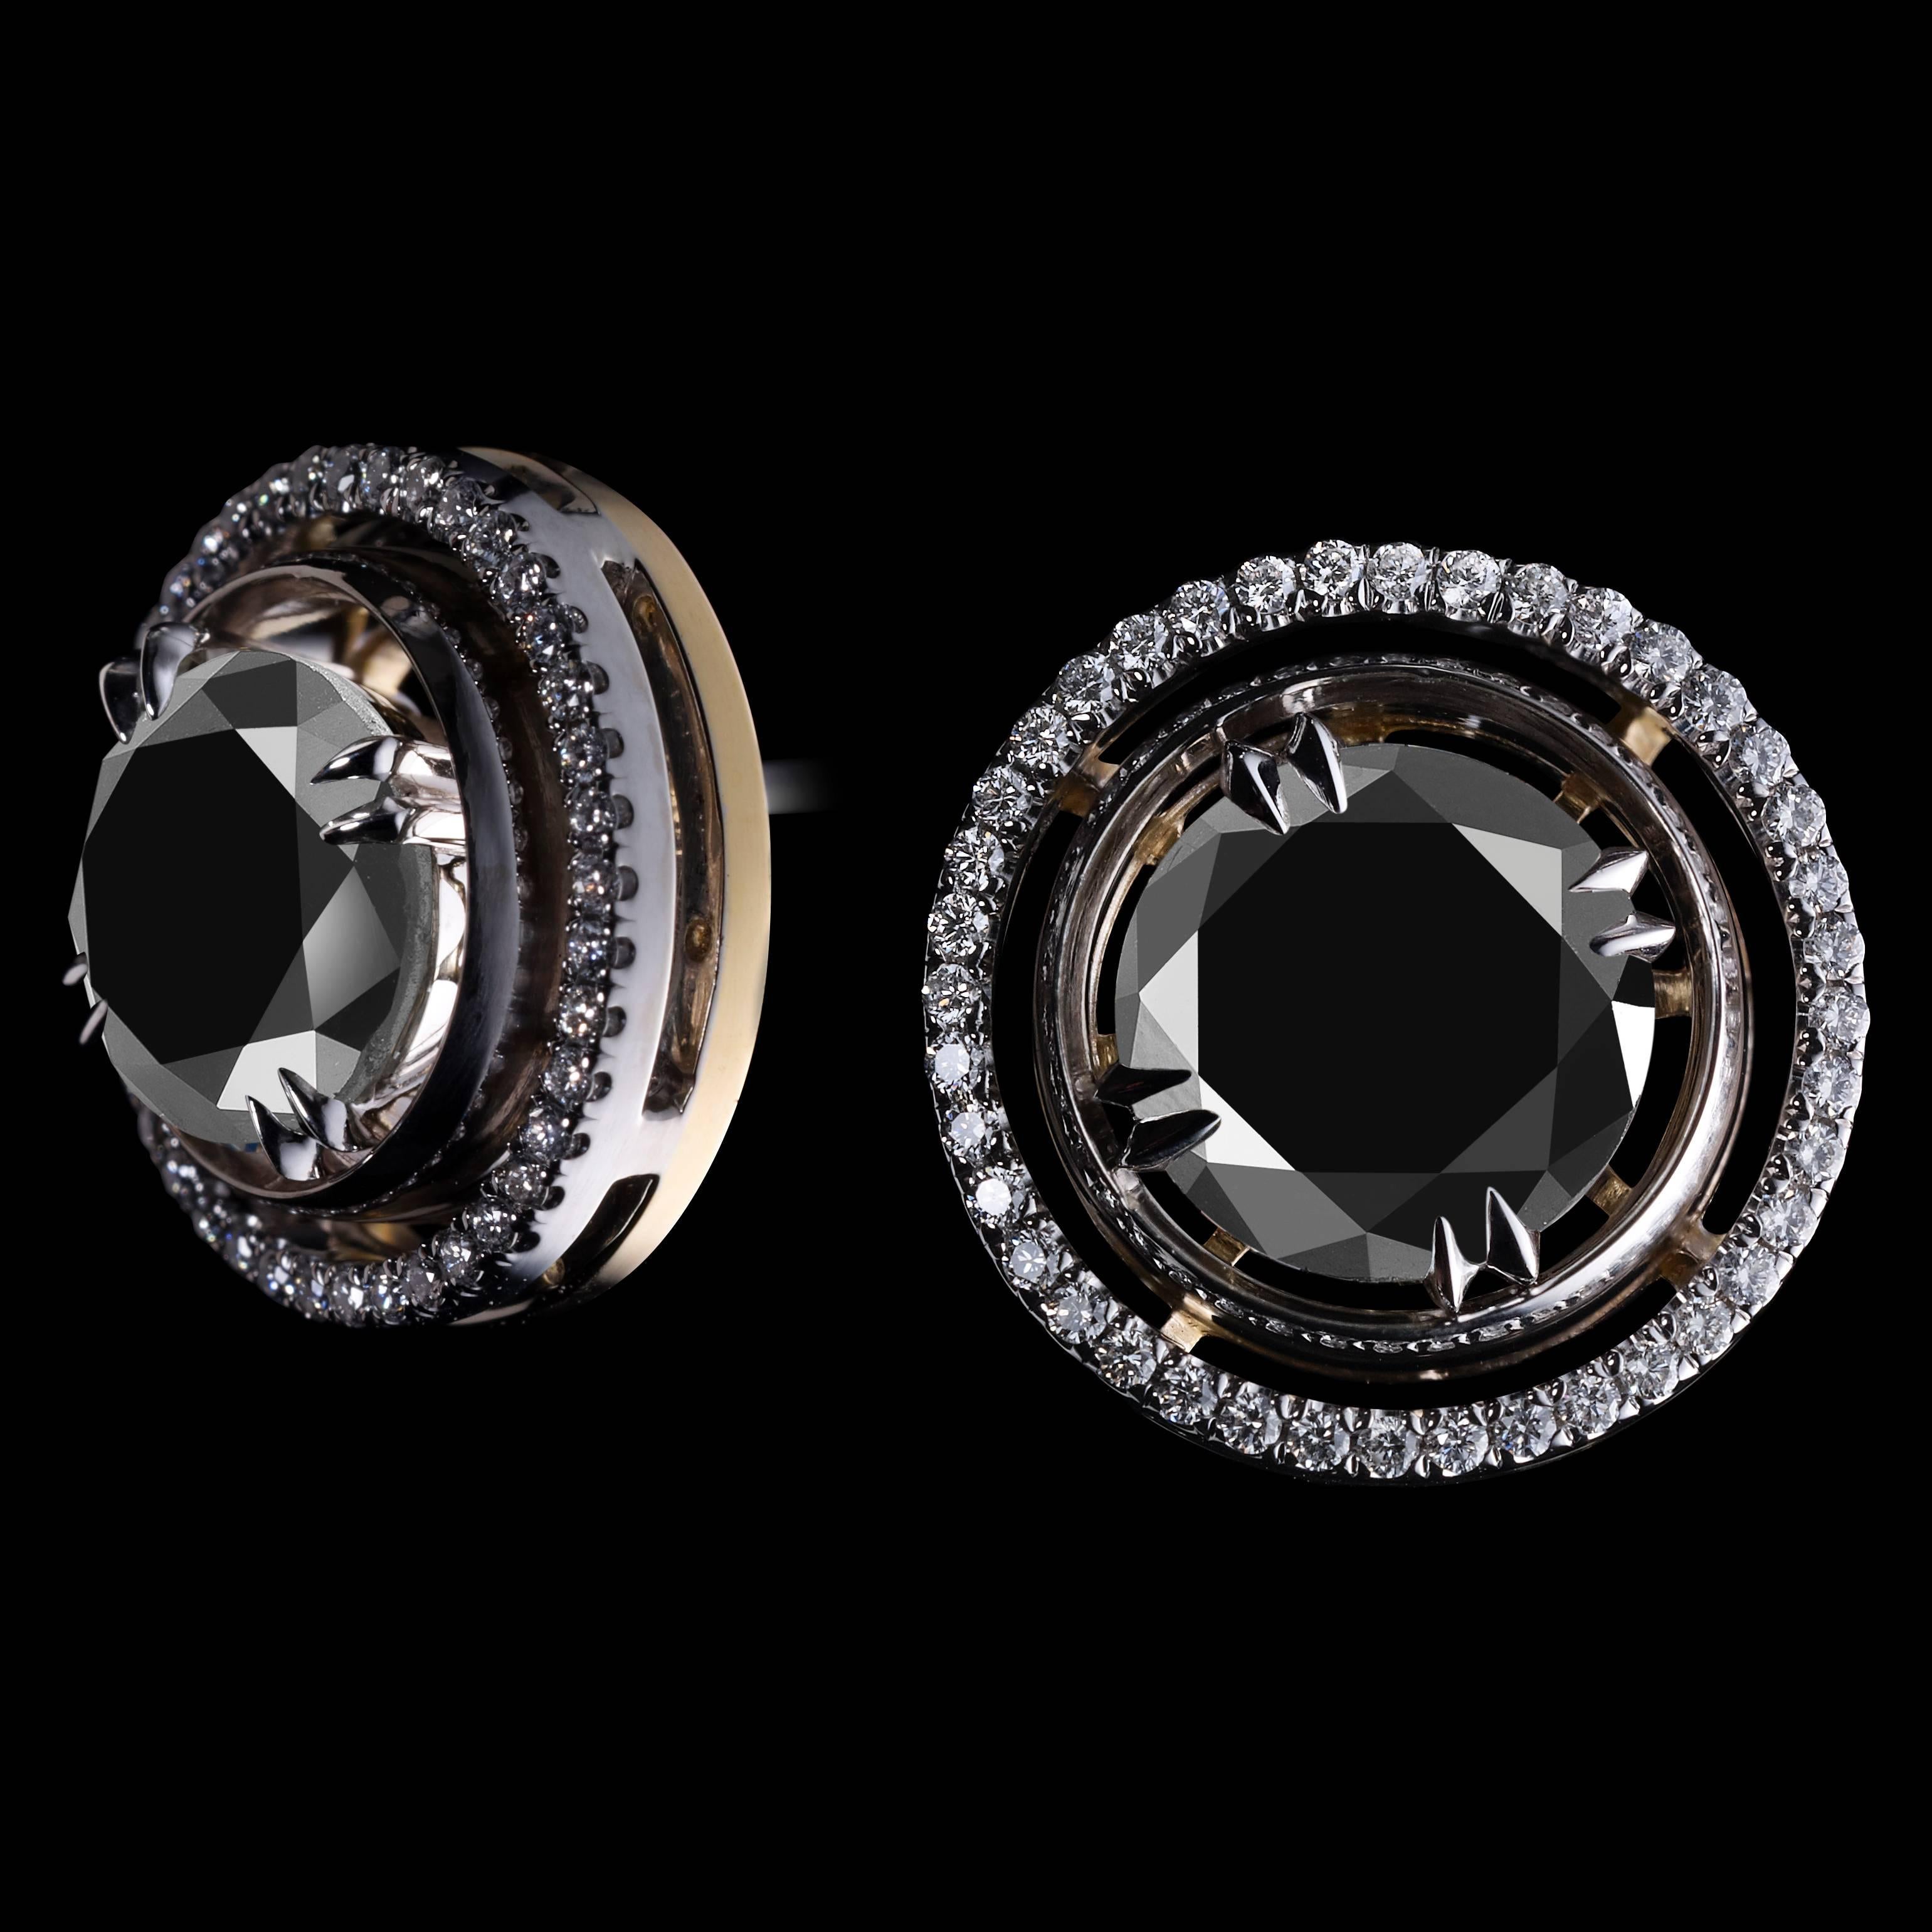 A pair of Round Black Diamond Cuff Links featuring Round Black Diamond Centers weighing 4.34 carats total detailed with 78 1mm signature floating Diamond melee and knife-edged wire. Cuff Links measure 1/2 inch in diameter and are set in Platinum